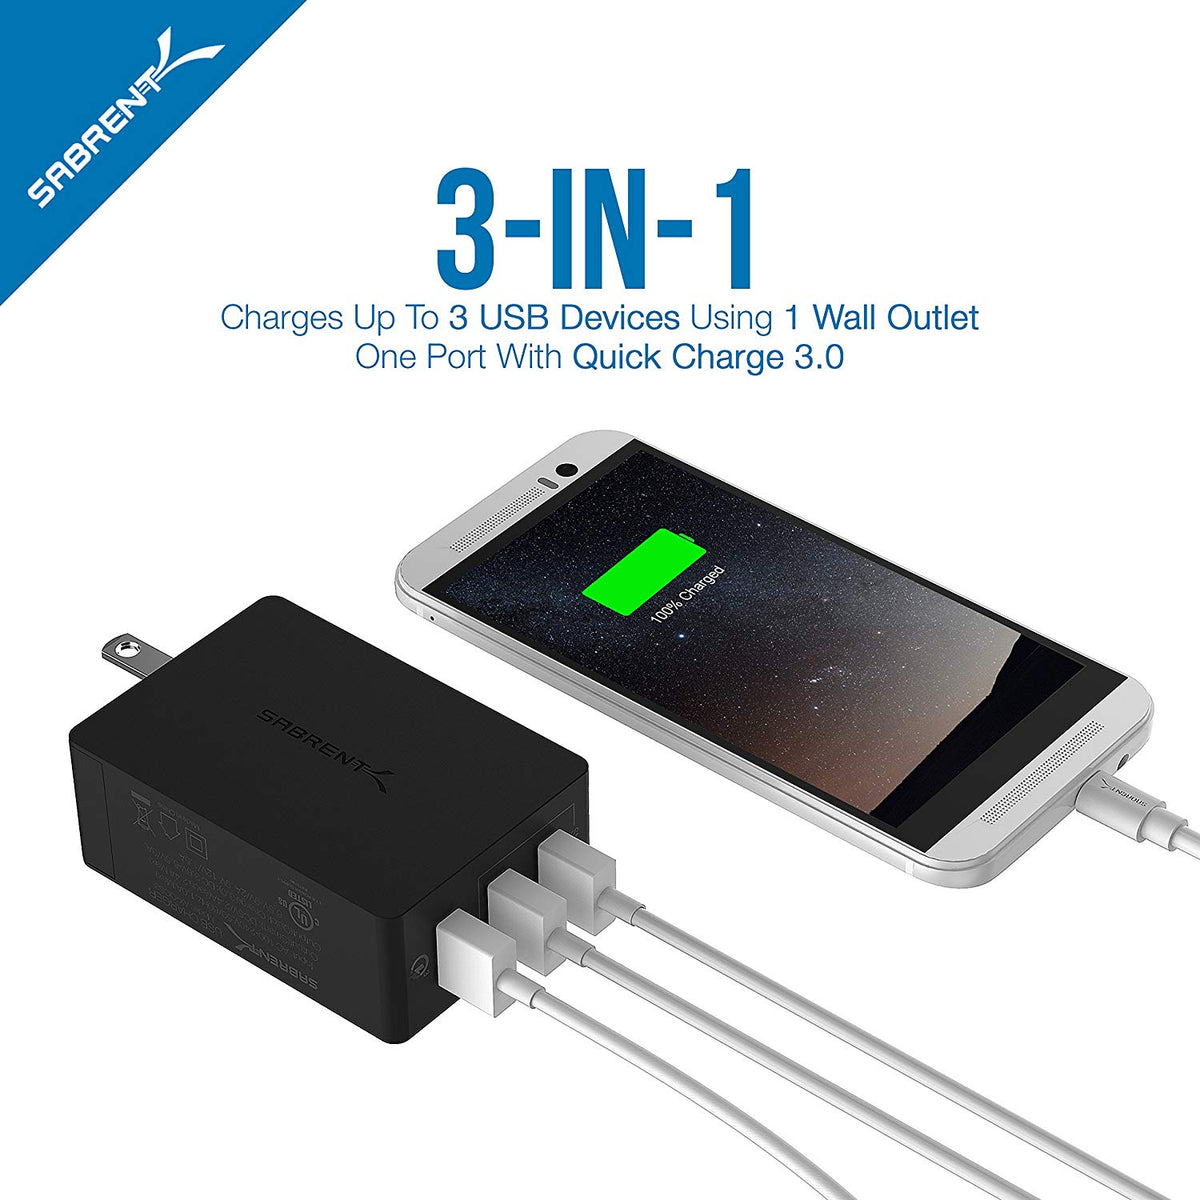 Quick Charge 3.0 [UL Certified] 30W 3-Port Wall USB Rapid Charger